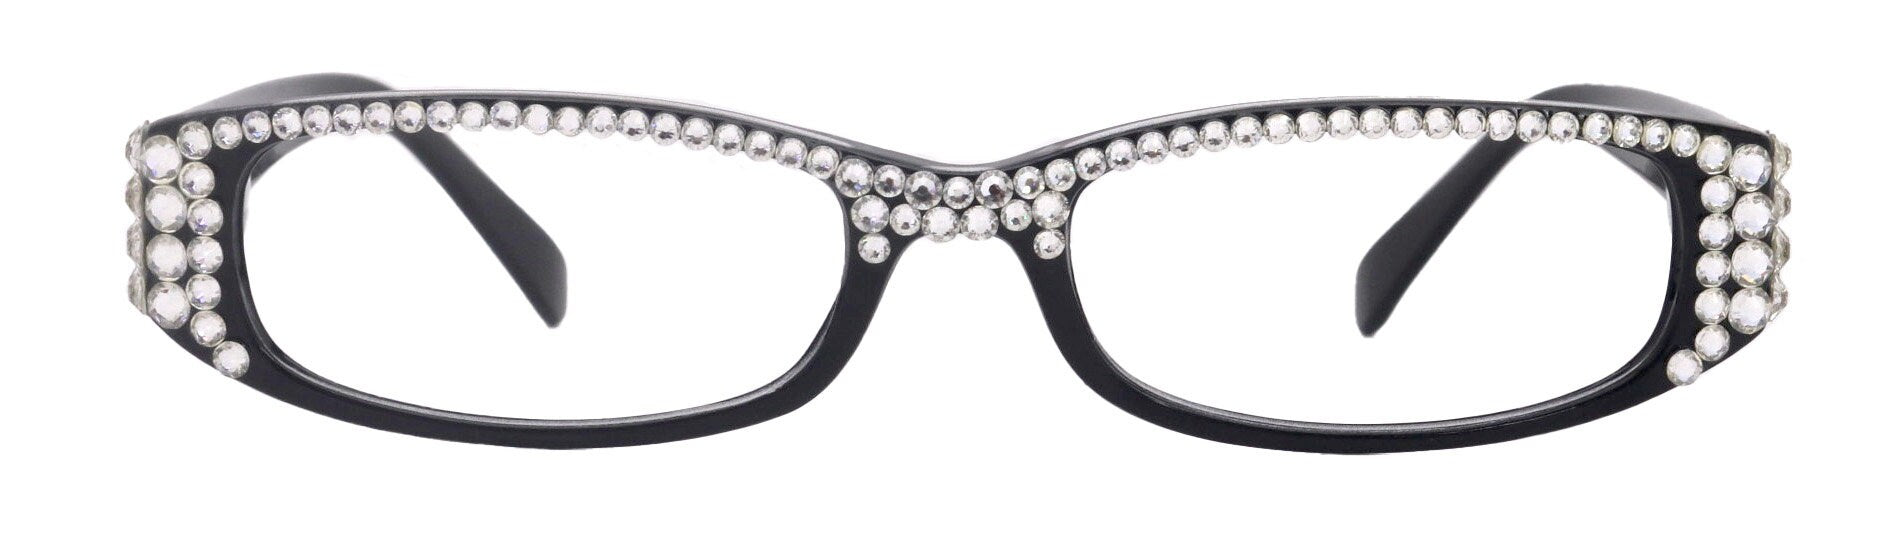 Elise, Bling Reading Glasses For Women W Full Top (Clear)Genuine European Crystals rectangular (Black) +1.25 ..+3, NY Fifth Avenue.